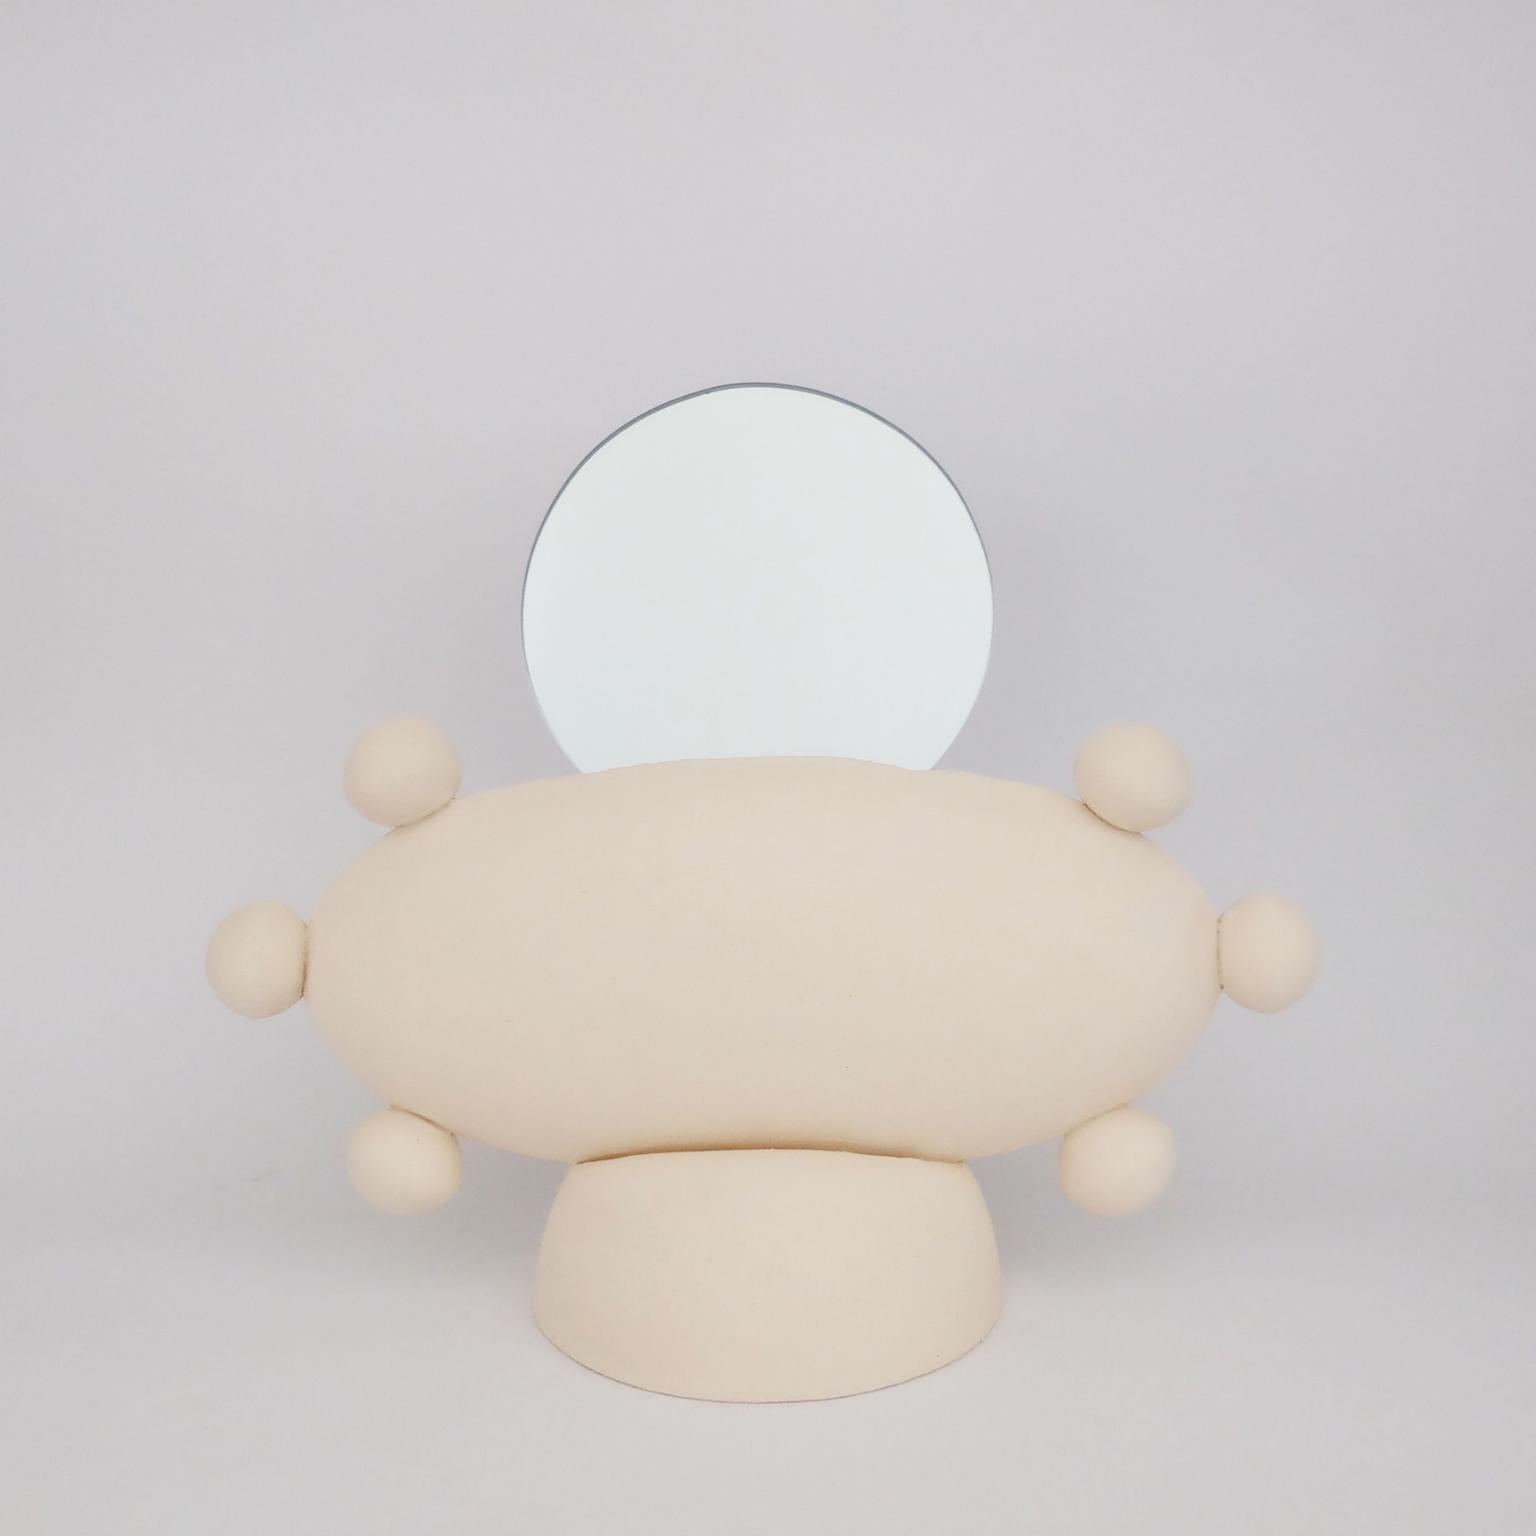 Unique UFO mirror by Ia Kutateladze
Dimensions: W 33 x H 26 cm
Materials: Clay

UFO 02 is a hand built ceramic mirror. Playful and bold functional decorative object, for various types of interiors.

IAAI / Ia Kutateladze is a Georgian